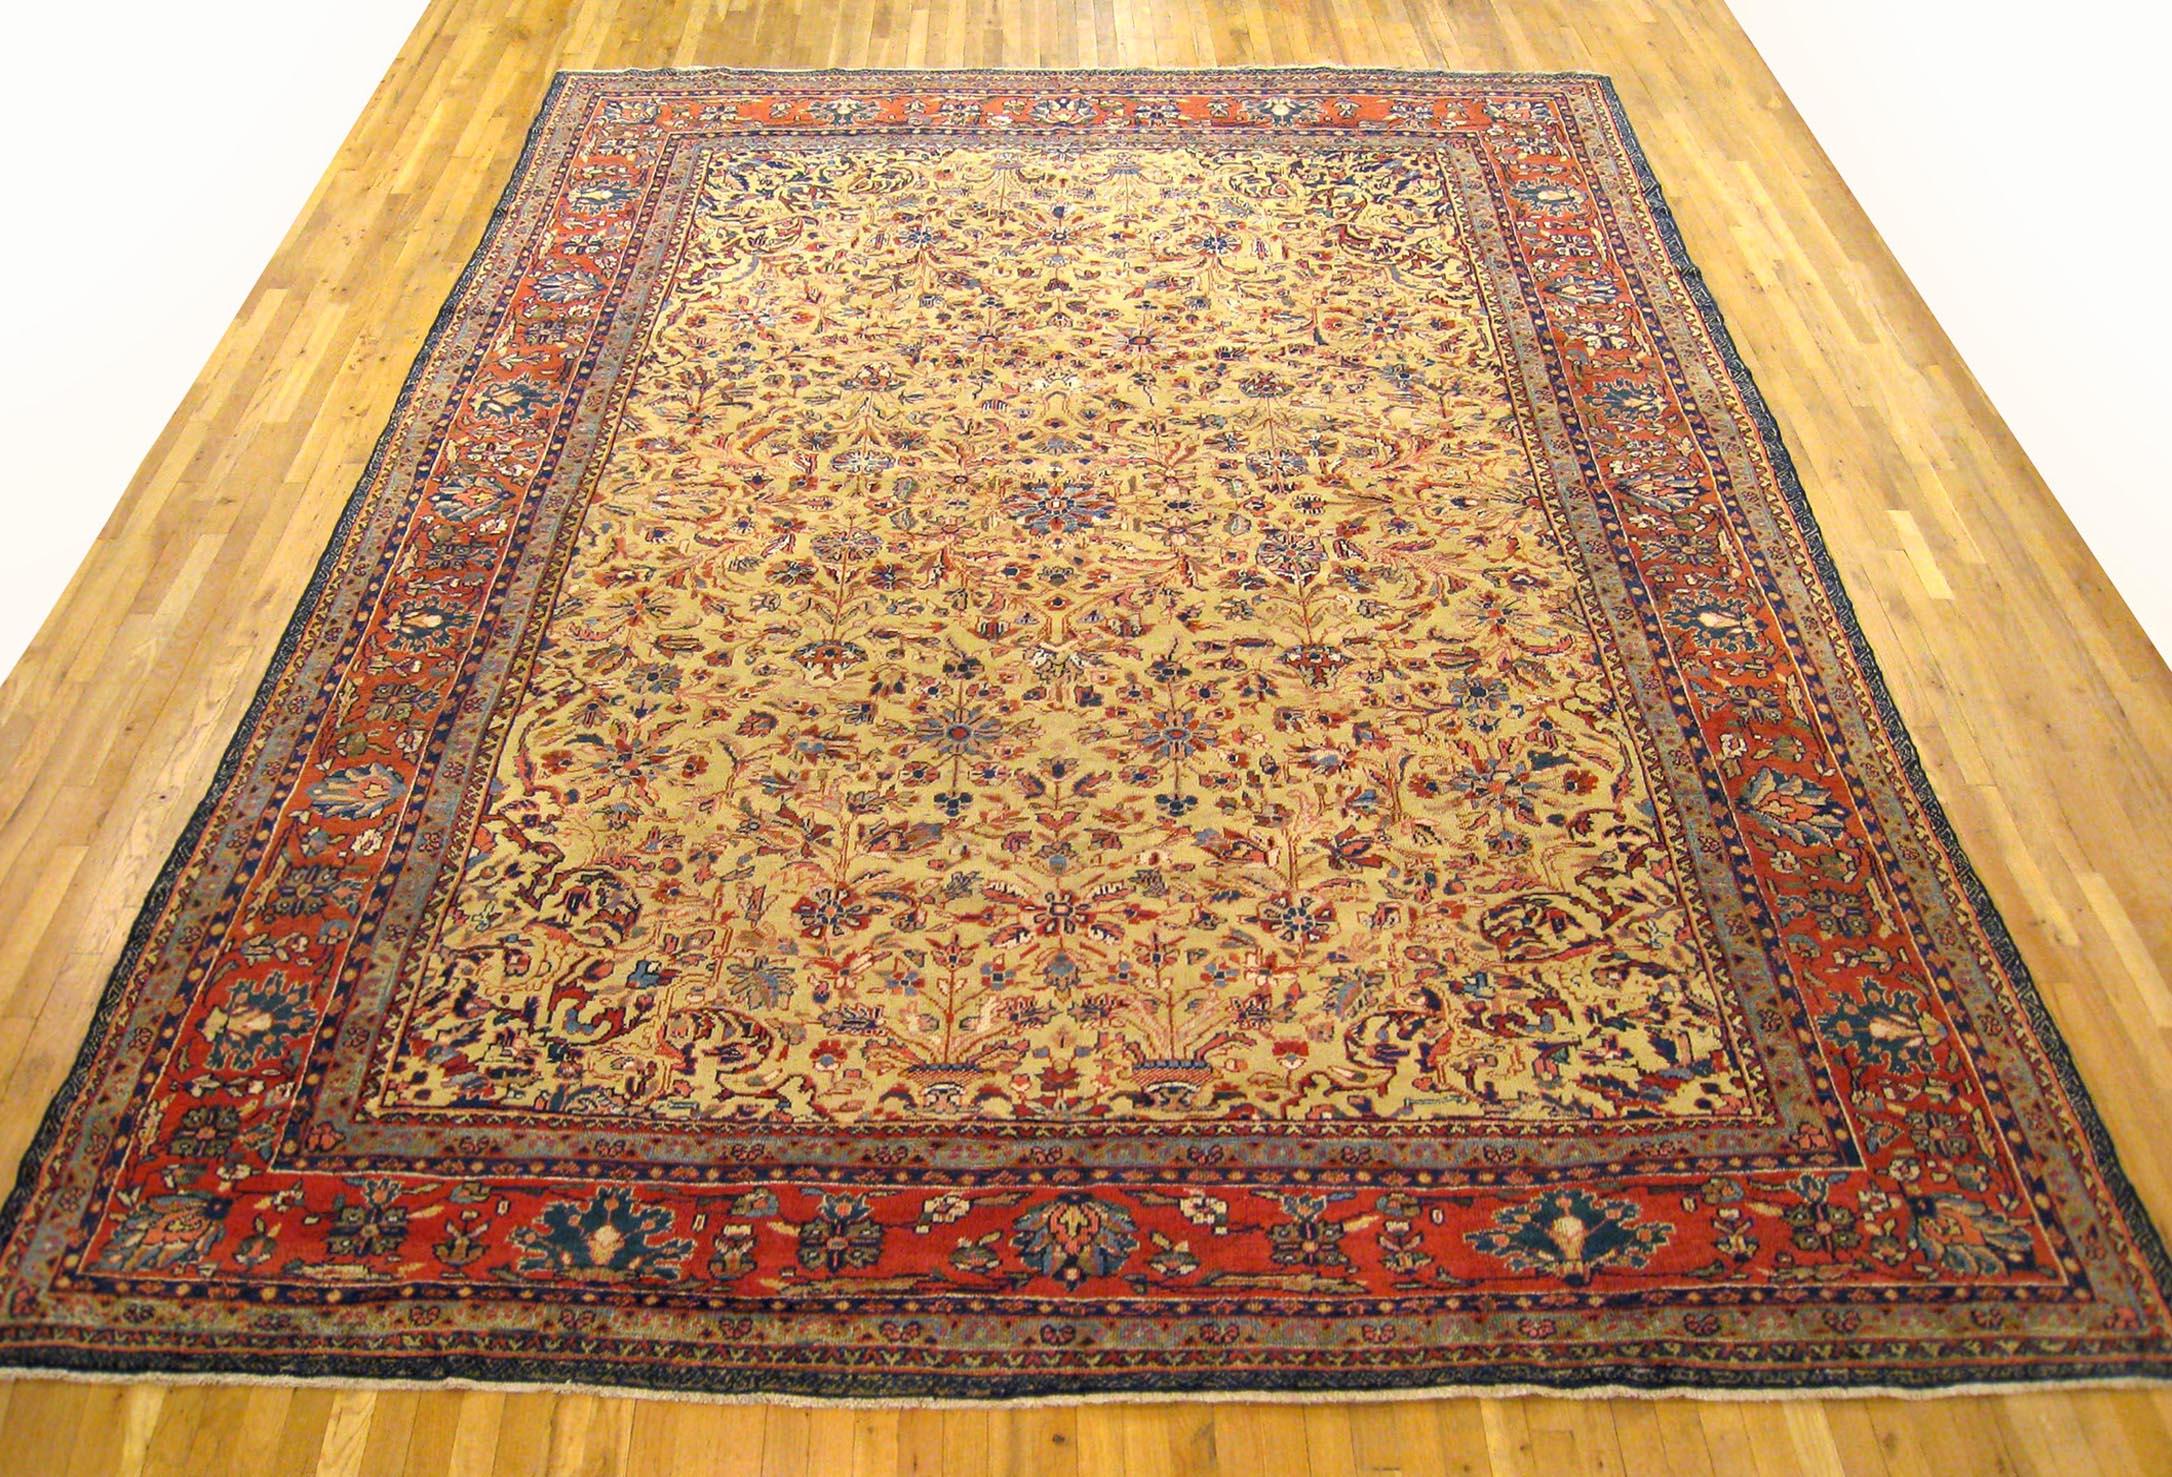 Antique Persian Sultanabad rug, Room size, circa 1900

A one-of-a-kind antique Persian Sultanabad oriental carpet with a thick and lustrous wool pile, knotted by hand, with soft touch and great resistance to wear. This carpet features floral